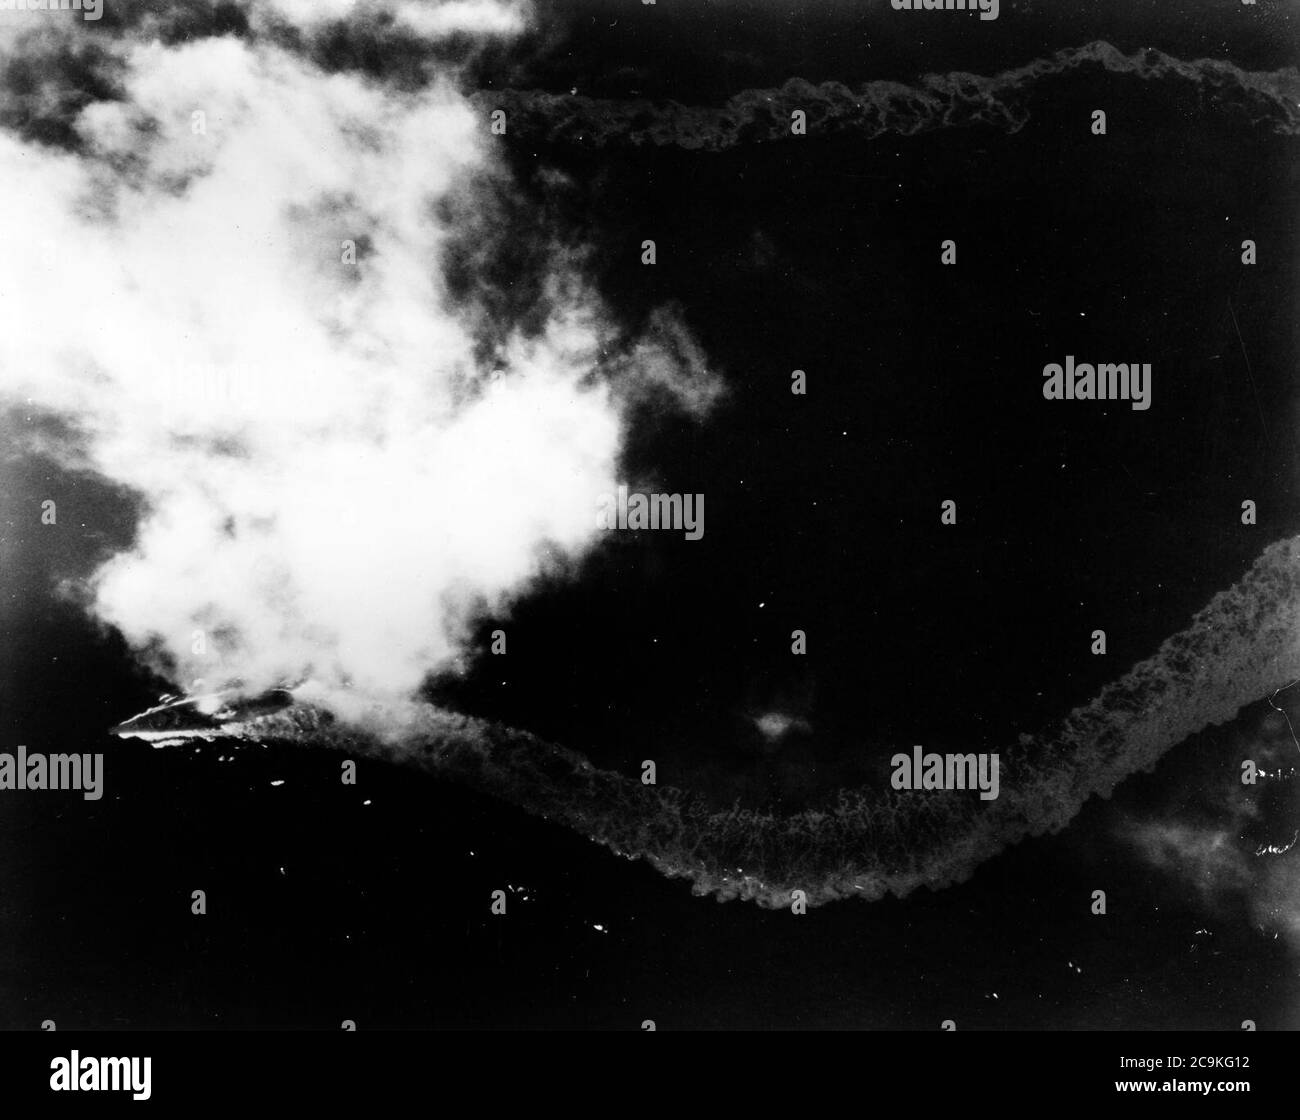 Japanese battleship Yamato maneuvers while under attack by U.S. Navy carrier planes north of Okinawa, 7 April 1945 (NH 62581). Stock Photo